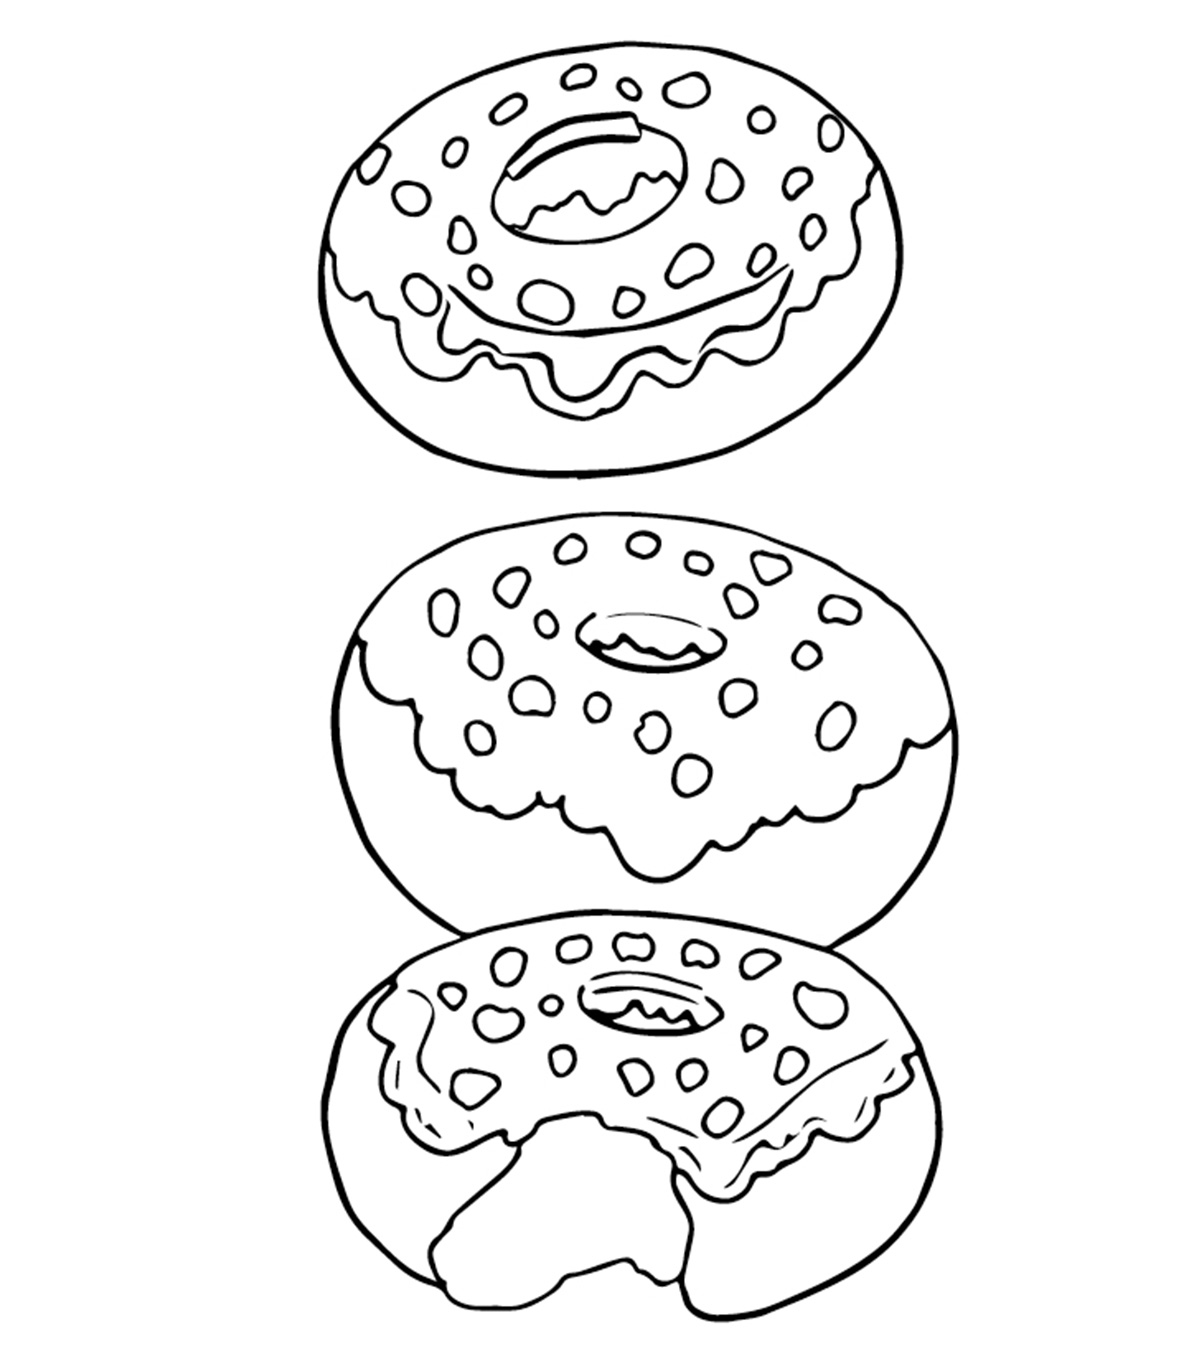 Donut 5 Cool Coloring Page